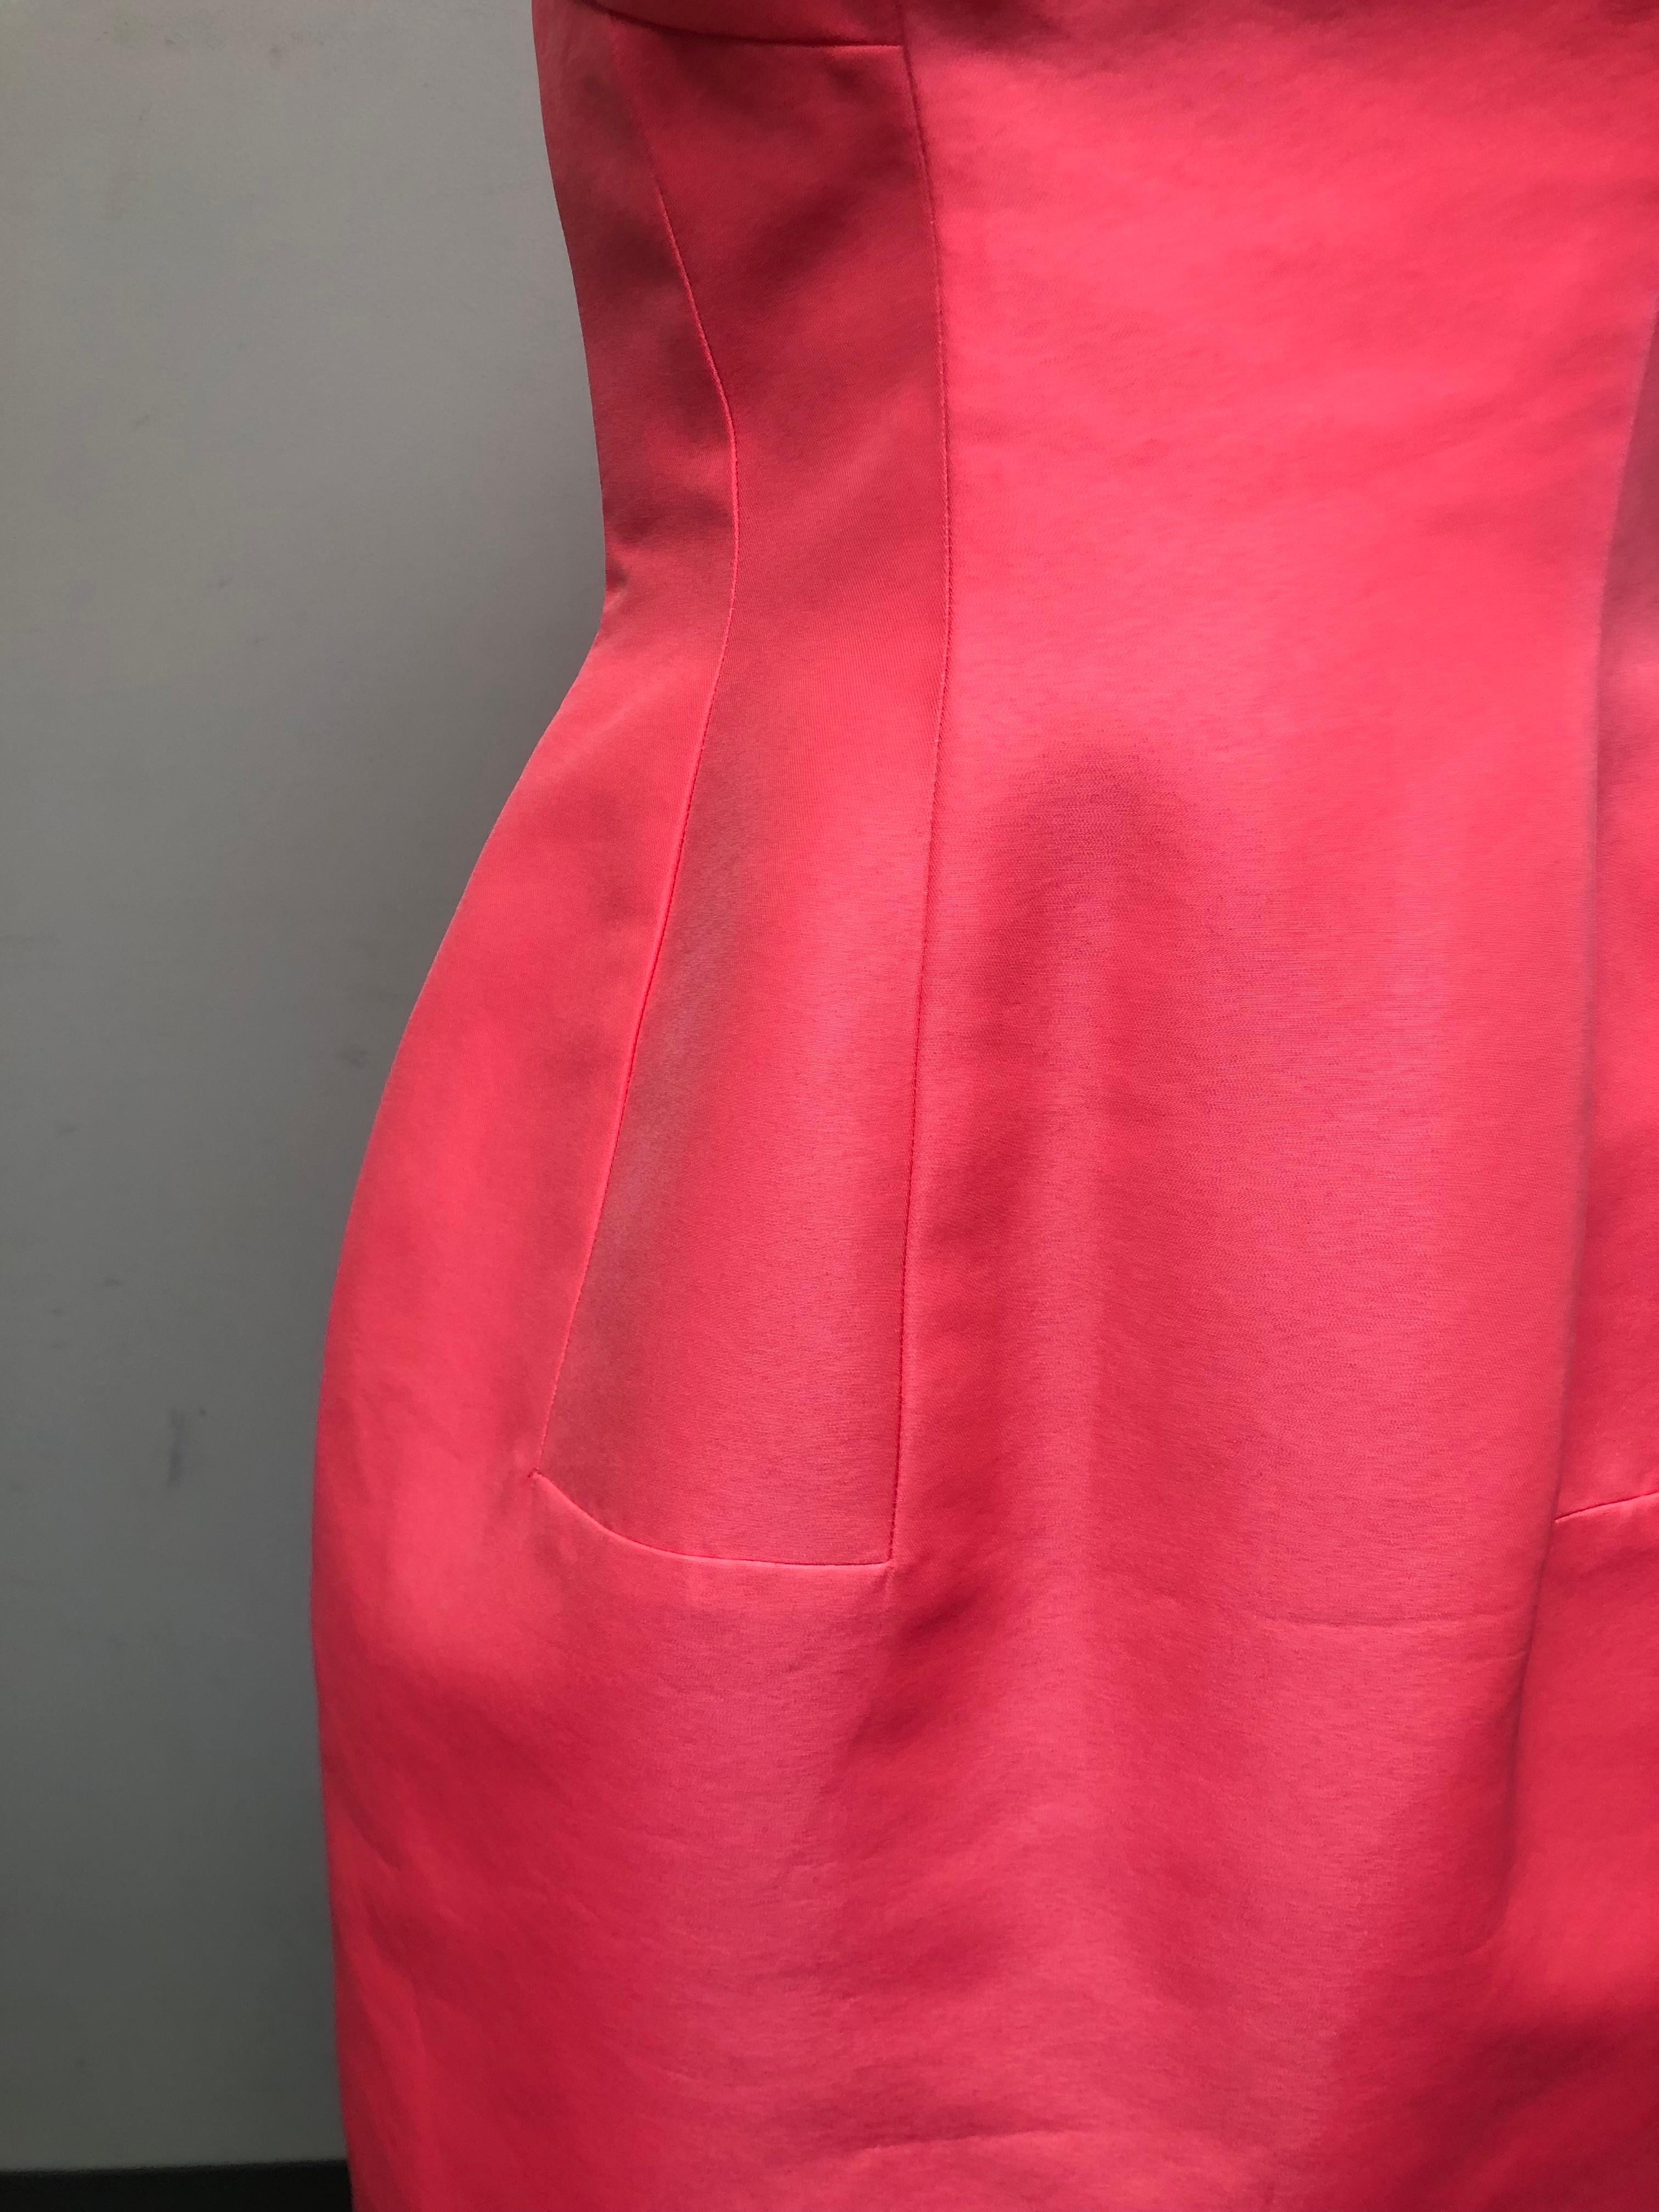 Shocking Pink 100% Italian Silk Dress with Flared Skirt  In Excellent Condition For Sale In Los Angeles, CA